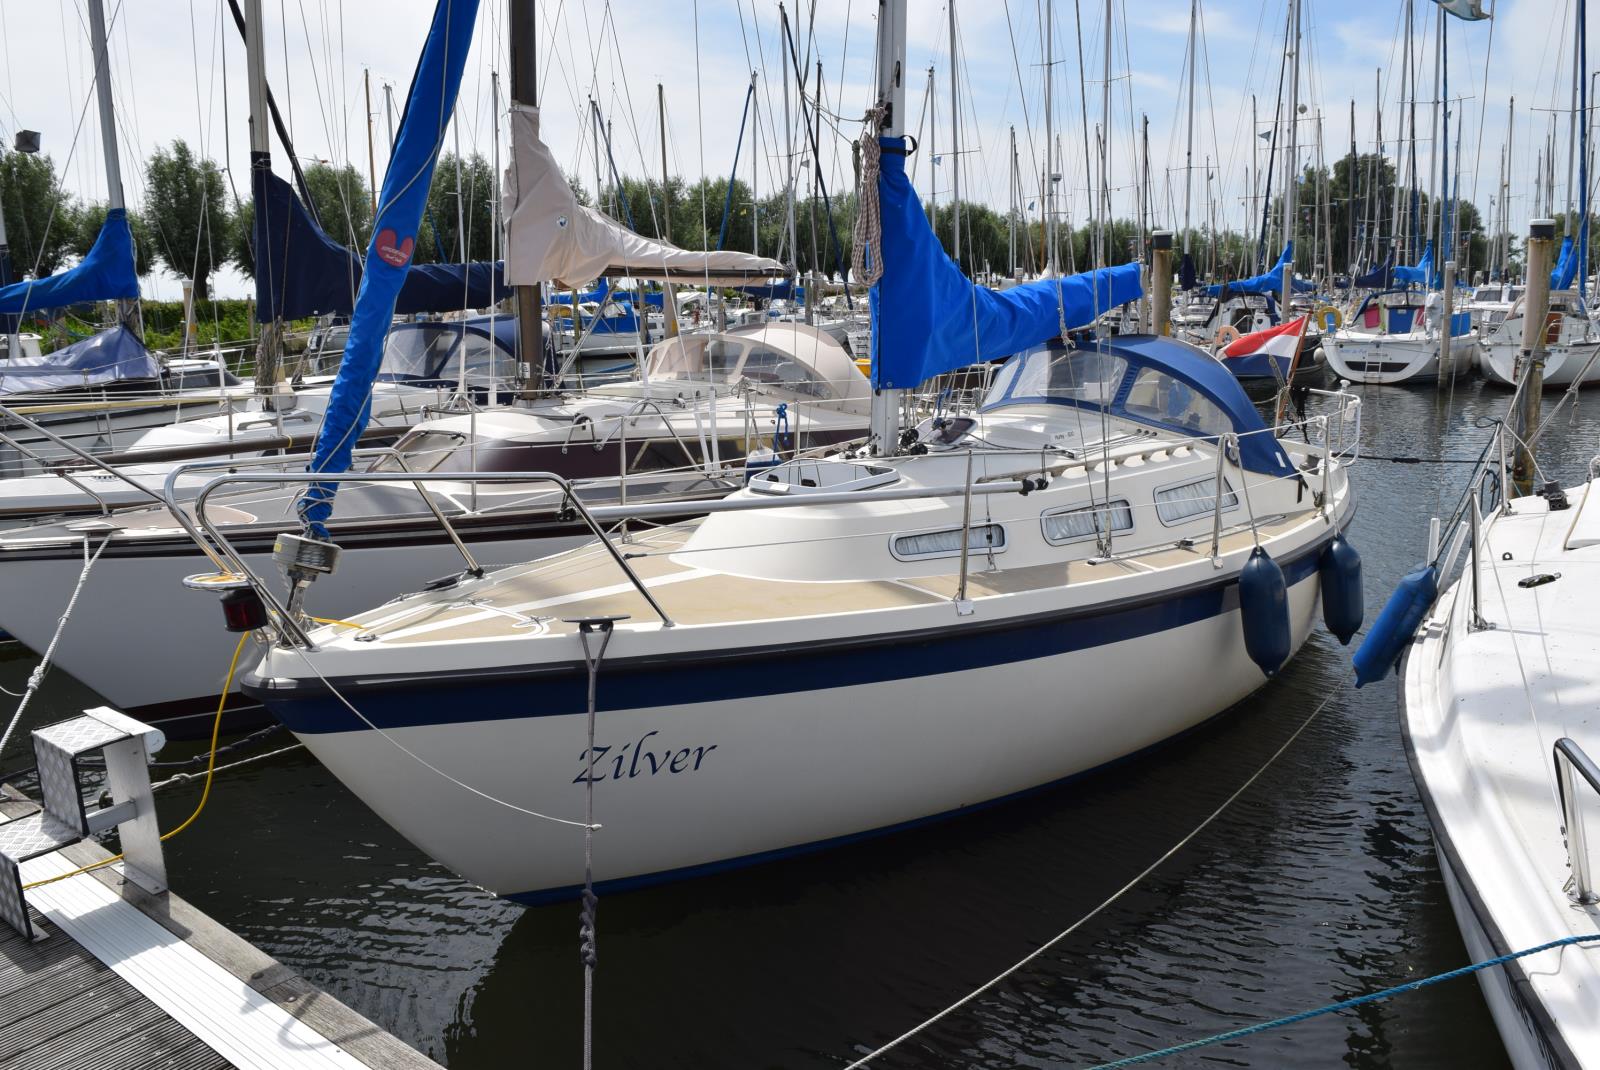 Waden Accountant amateur Looking for a boat ? Hurley 800 sailboat for sale at Sealion Yachts